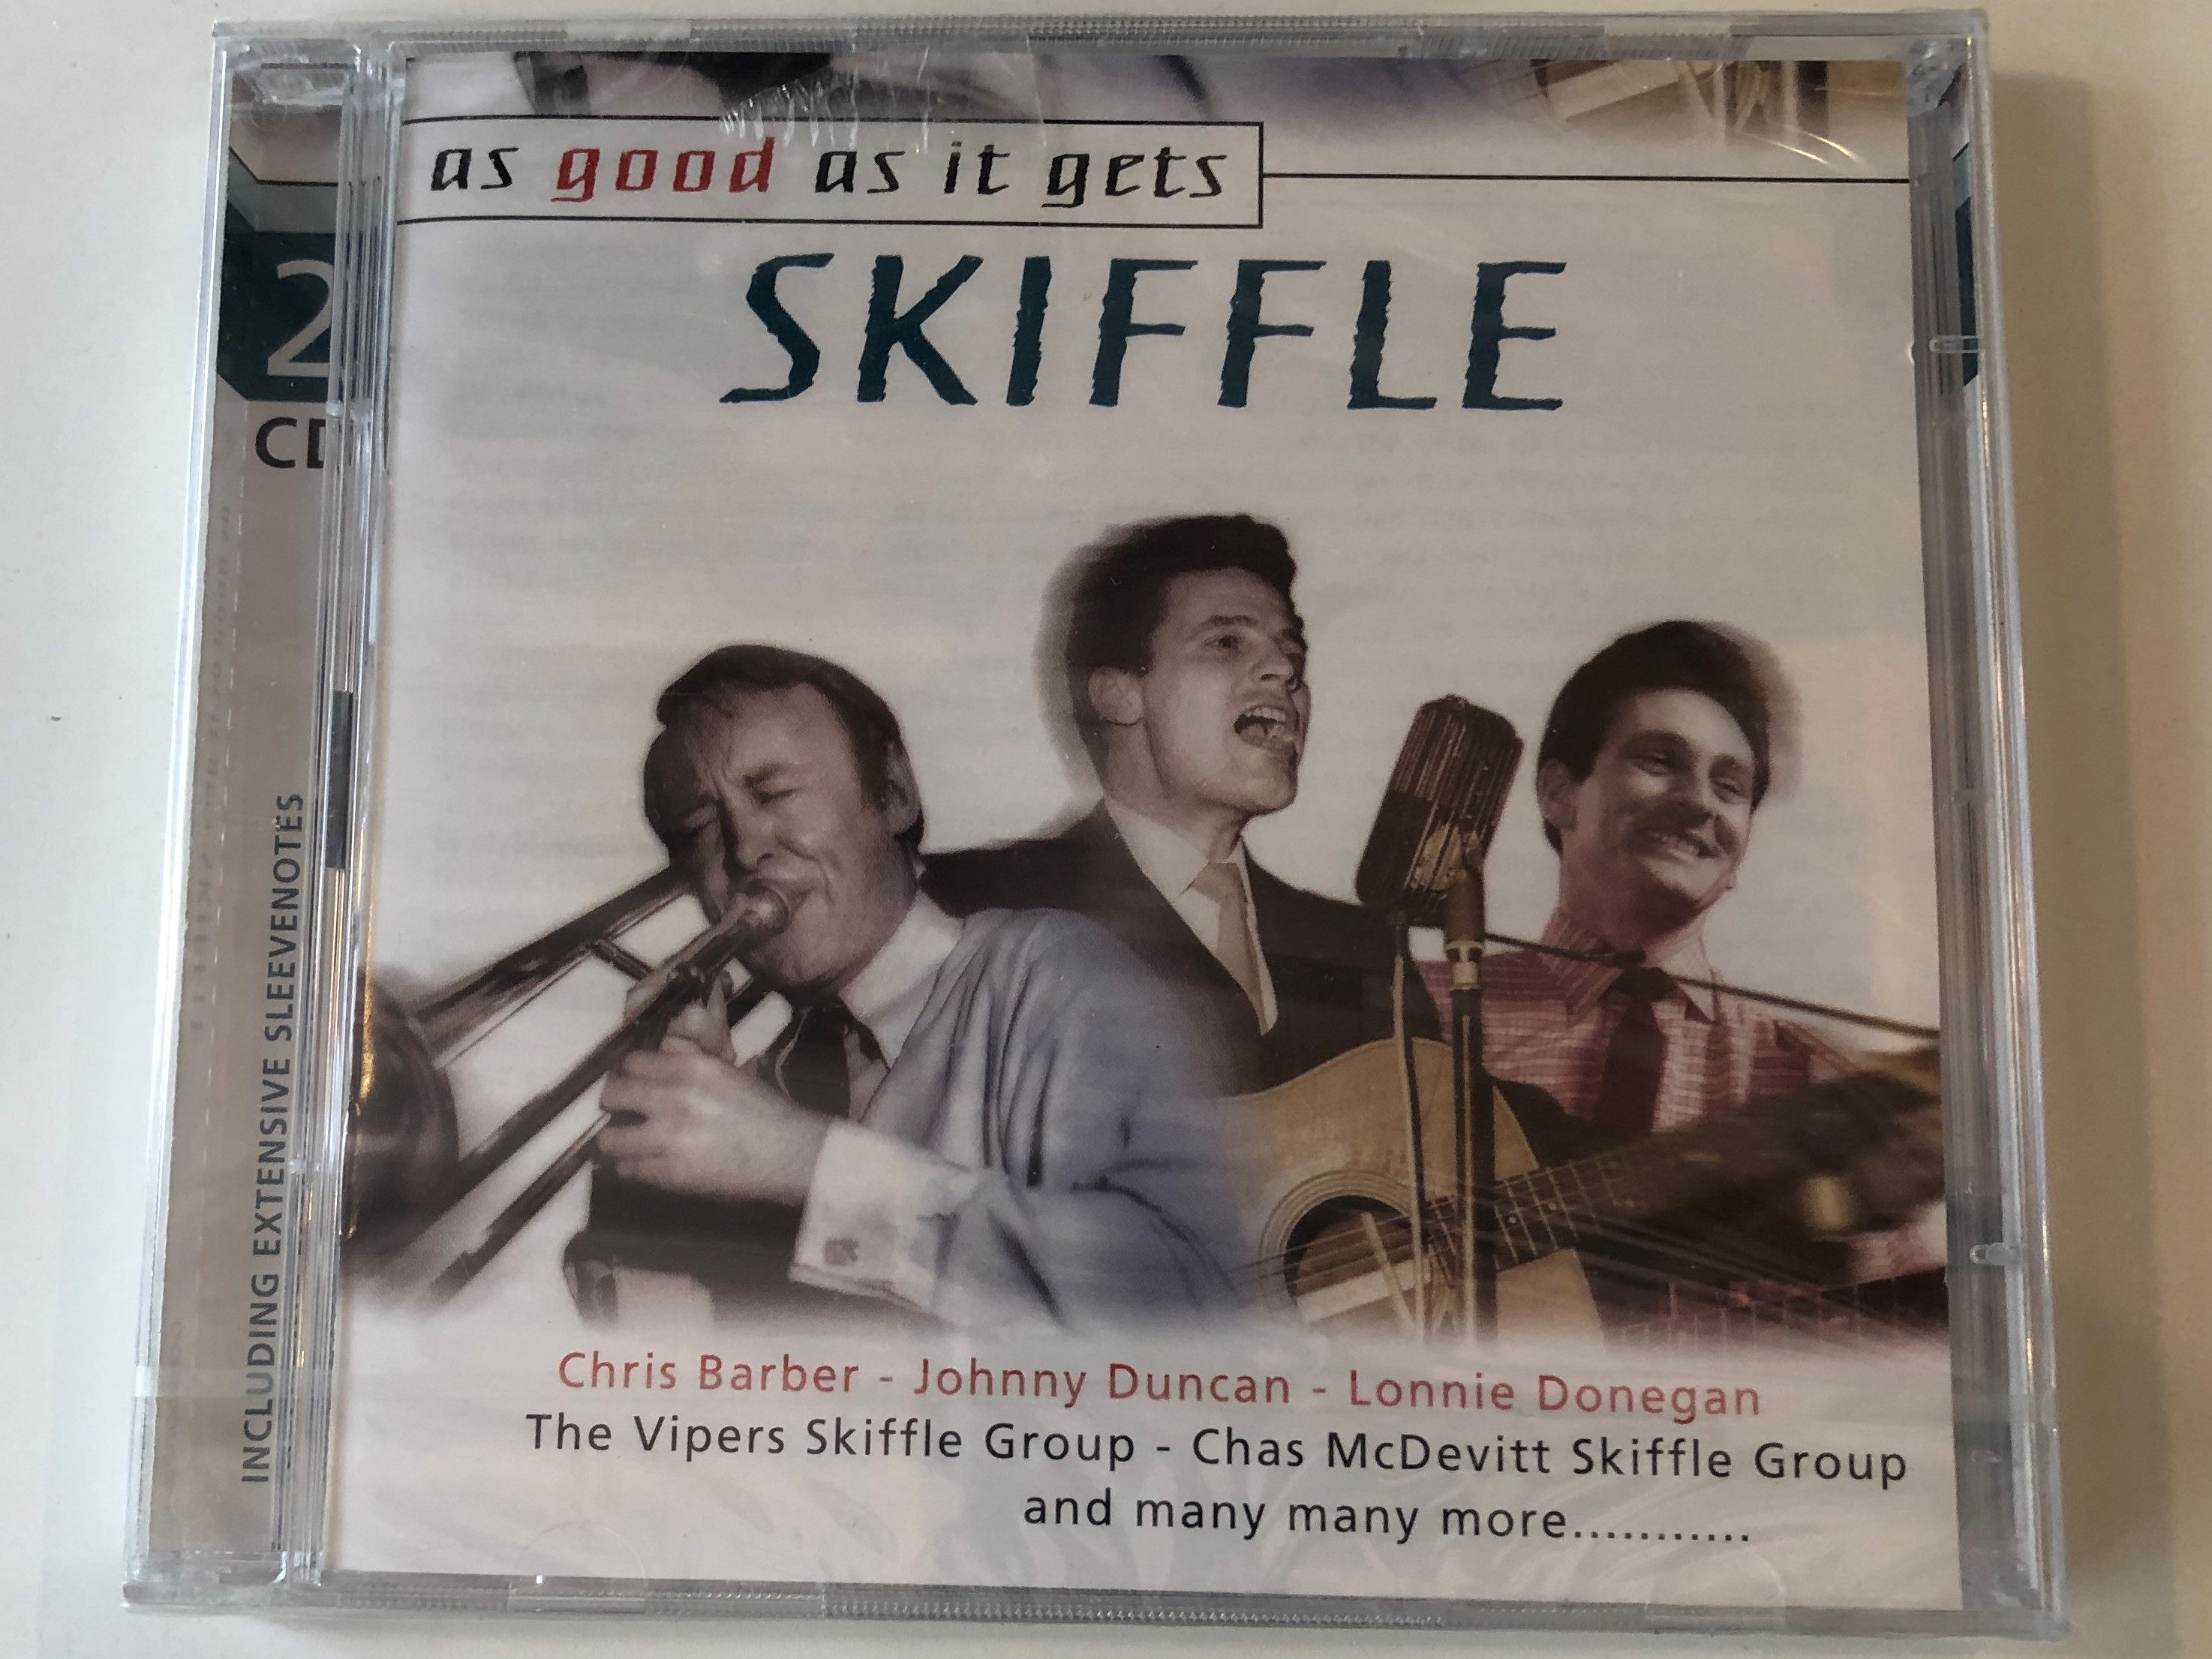 skiffle-as-good-as-it-gets-chris-barber-johnny-duncan-lonnie-donegan-the-vipers-skiffle-group-chas-mcdevitt-skiffle-group-and-many-more...-disky-2x-audio-cd-2000-do-250522-1-.jpg